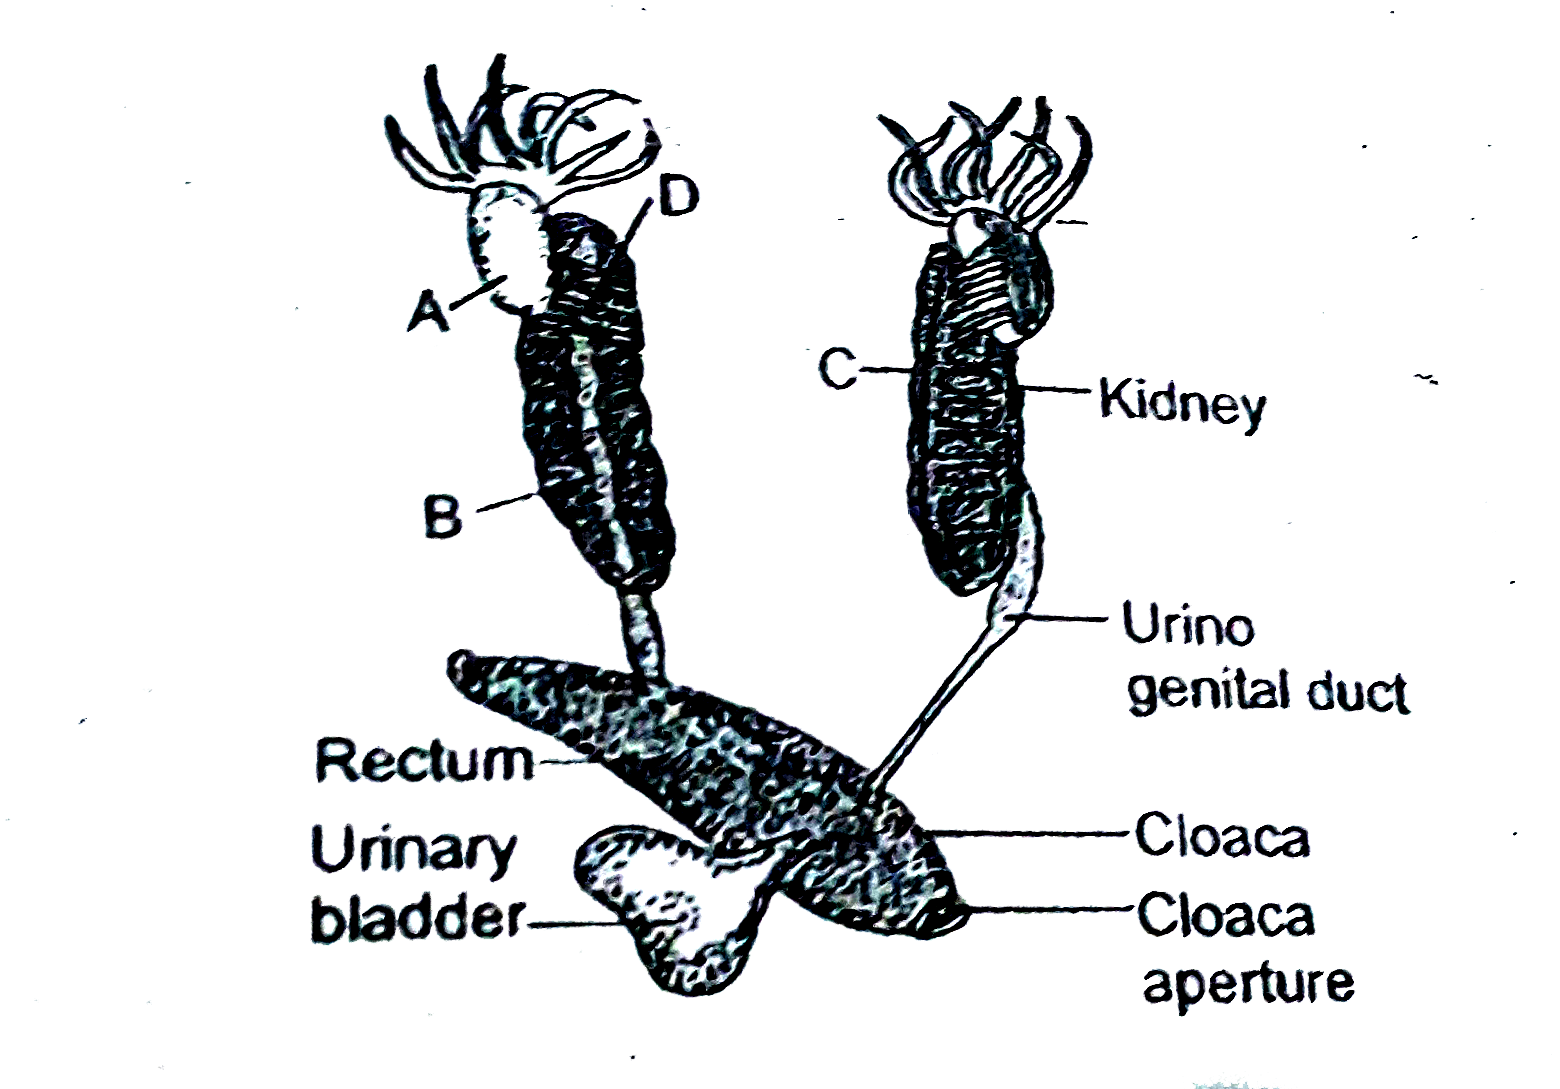 Following is the diagram of the male reproductive system of frog select the correct set of names labelled A,B,C and D.    1)
A-Fat bodies, B-Ureter, C-Bladder's canal, D-Vasa efferentia
 2)
A-Fat bodies, B-Bidder's canal, C-Ureter, D-Vasa efferentia
 3)
A-Adrenal gland, B-Bidder's canal, C-ureter, D-Vasa efferentia

 4)A-Testes, B-Adrenal gland, C-Bidder's canal, D-Vasa efferentia